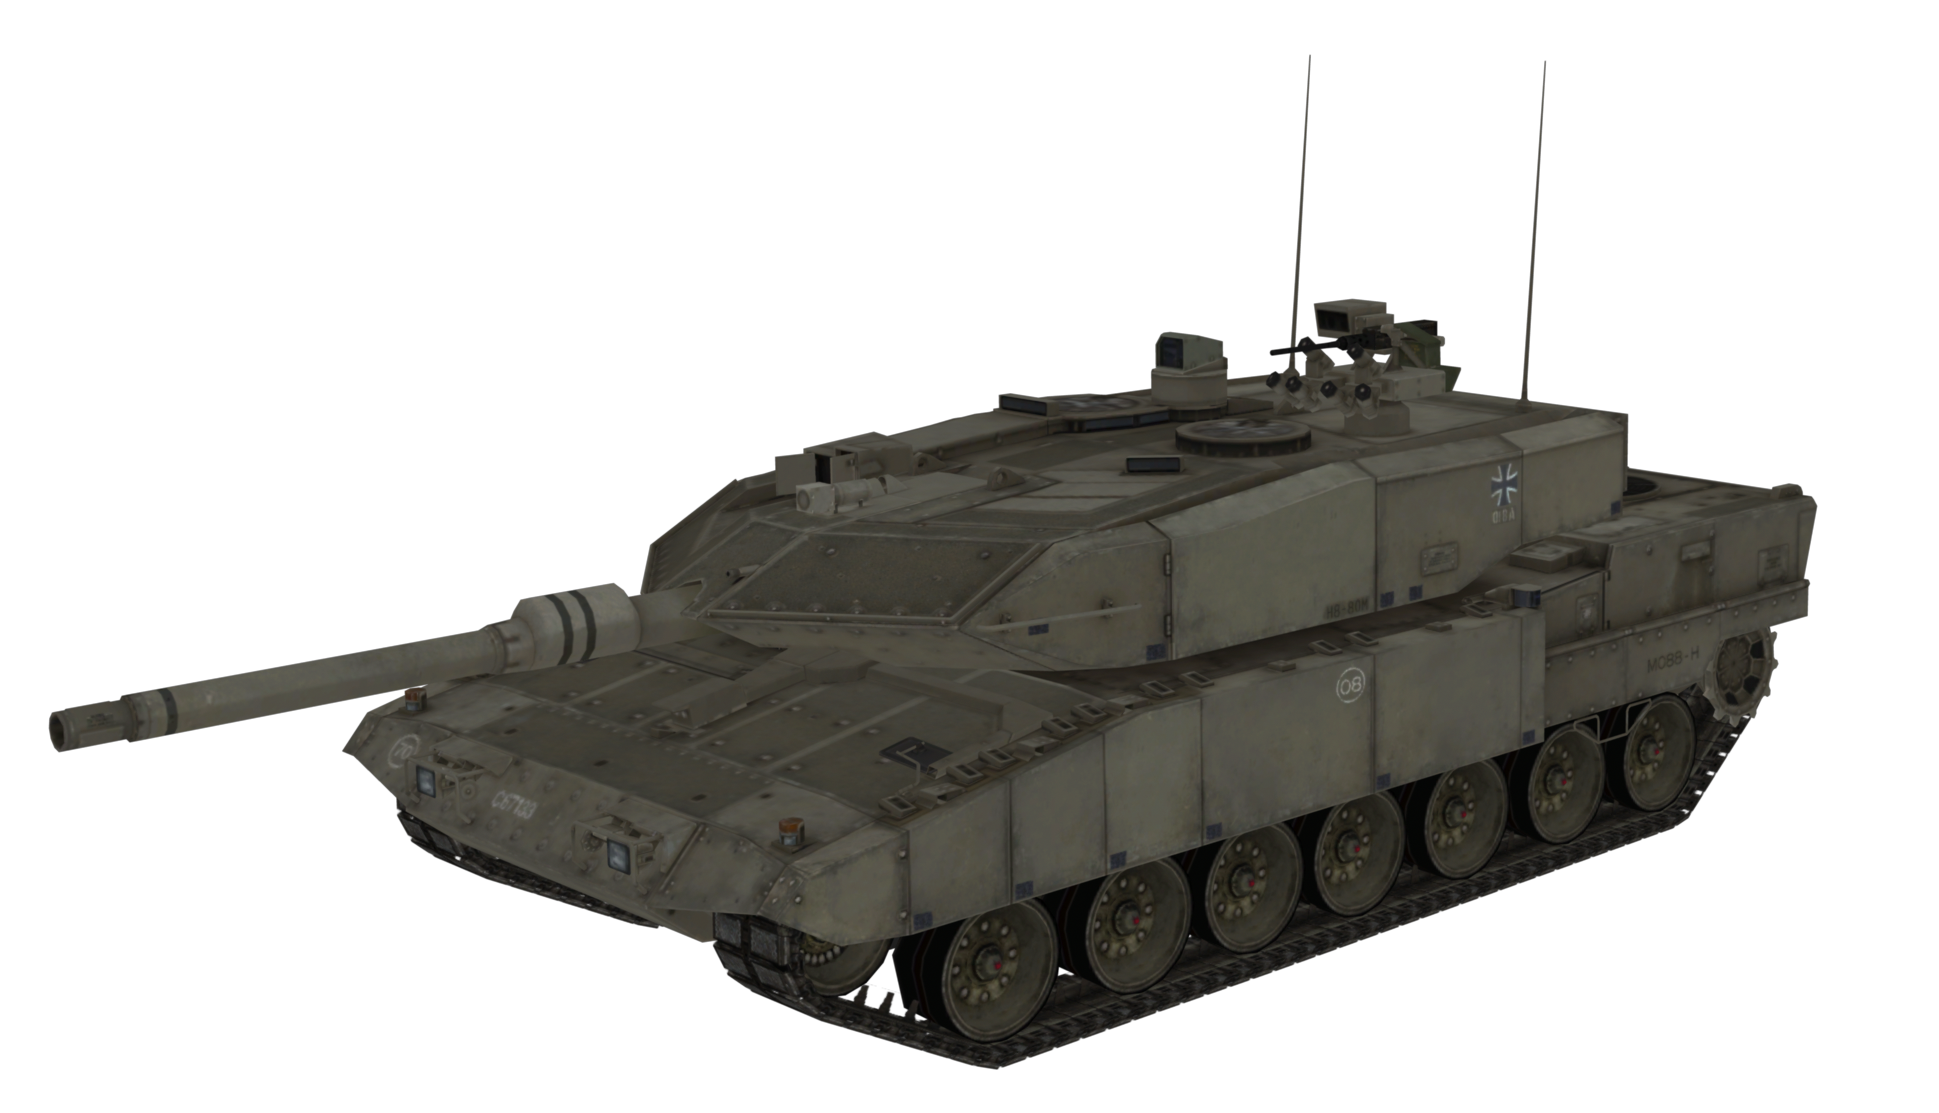 Leopard 2 - The Call of Duty Wiki - Black Ops II, Ghosts, and more!